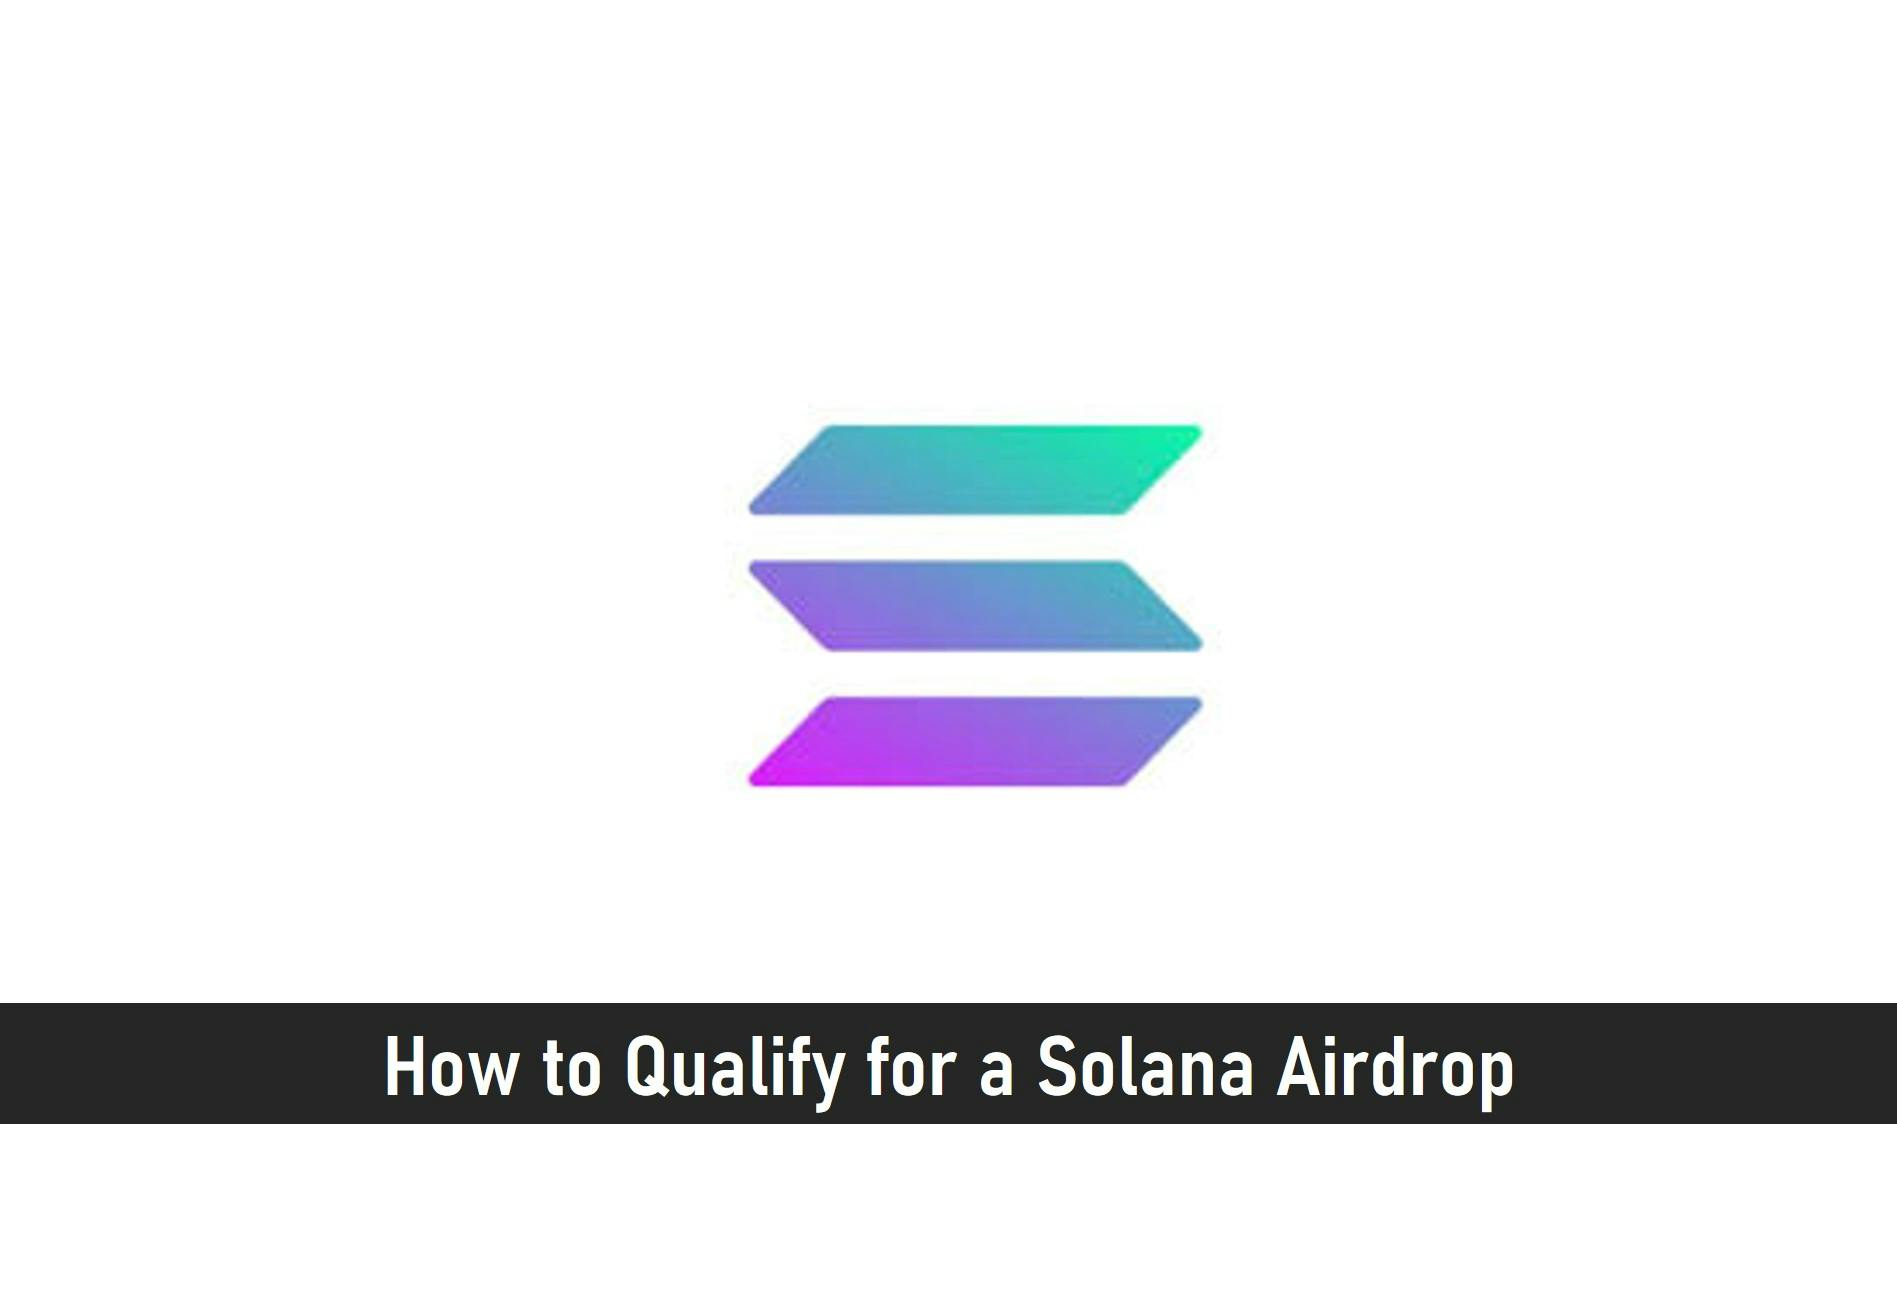 How to Qualify for a Solana Airdrop